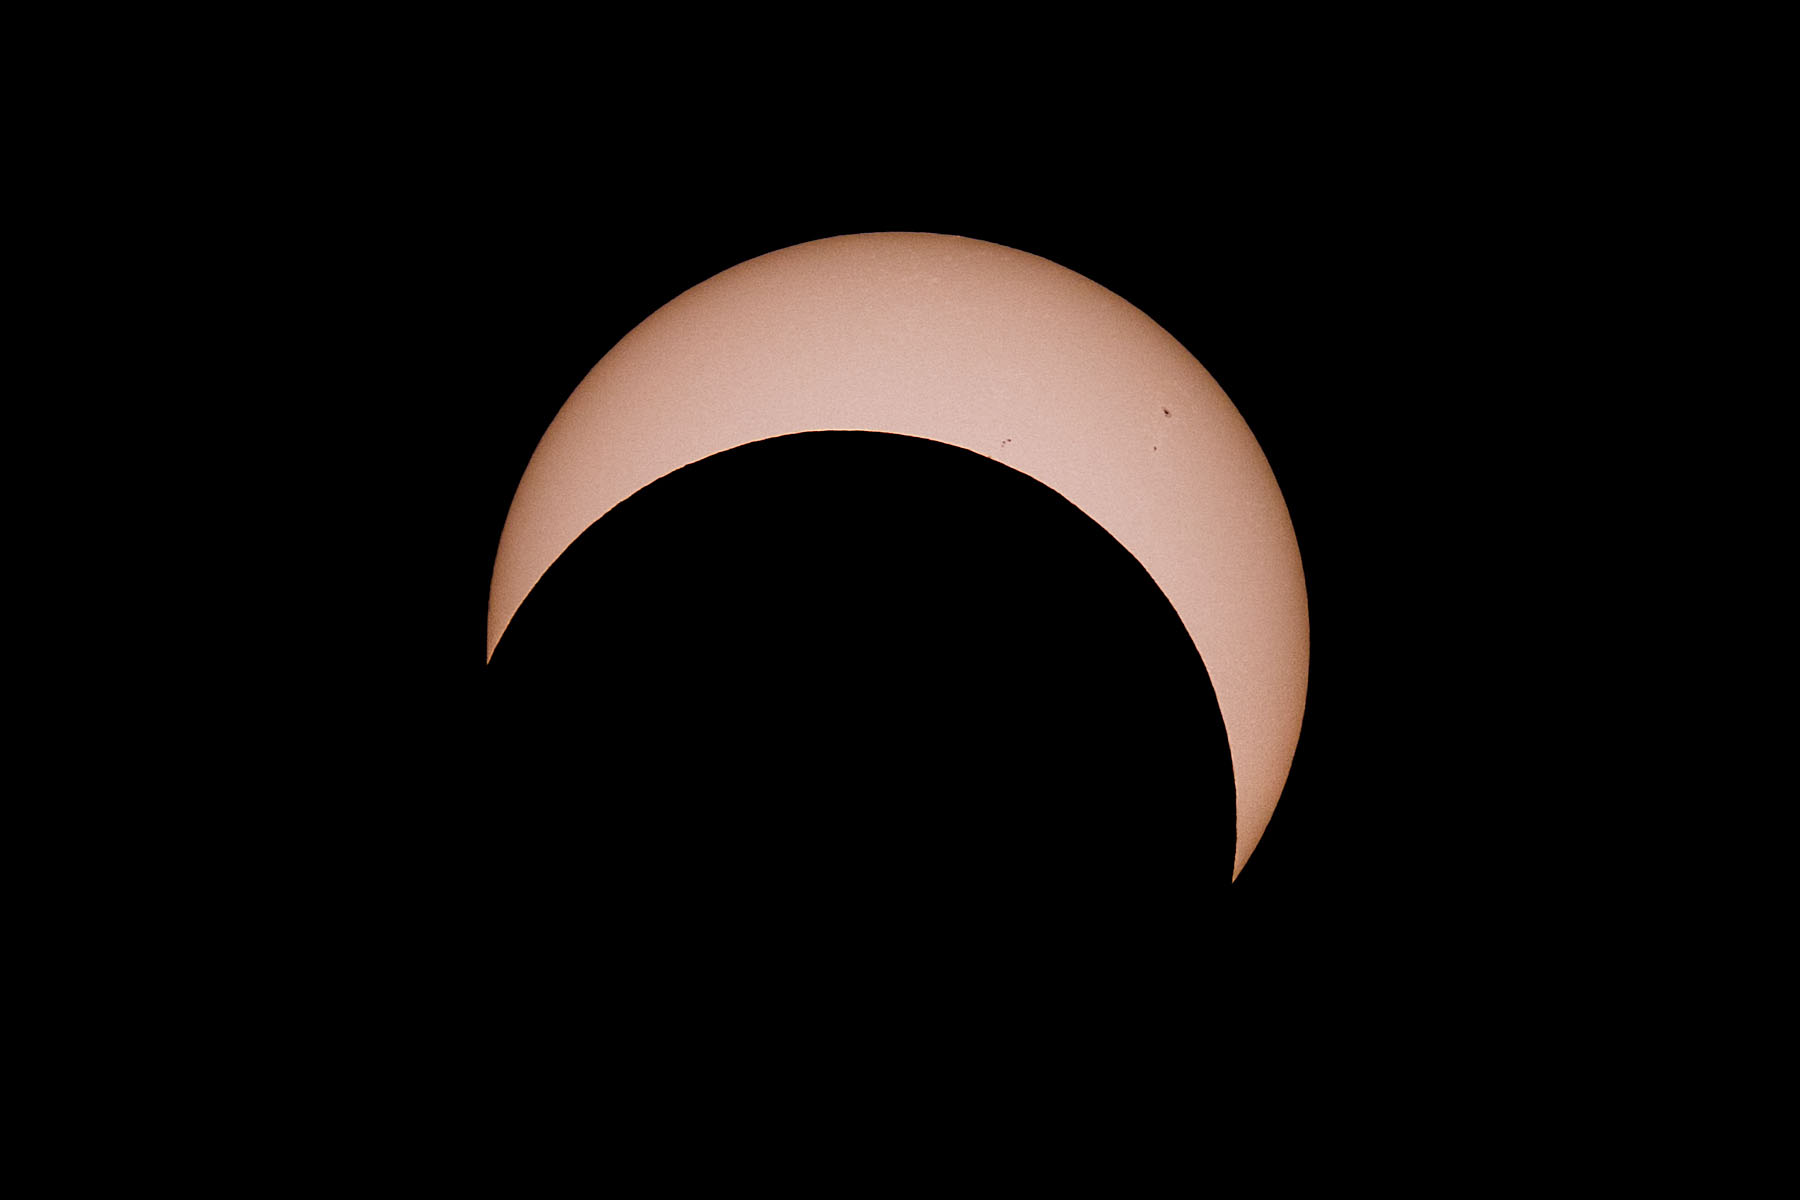 Annular solar eclipse, 21 minutes after peak.  Glass solar filter on Televue 85 telescope, Canon 6D Mark II camera on T-mount, 600mm F7 equivalent.  Click for next photo.